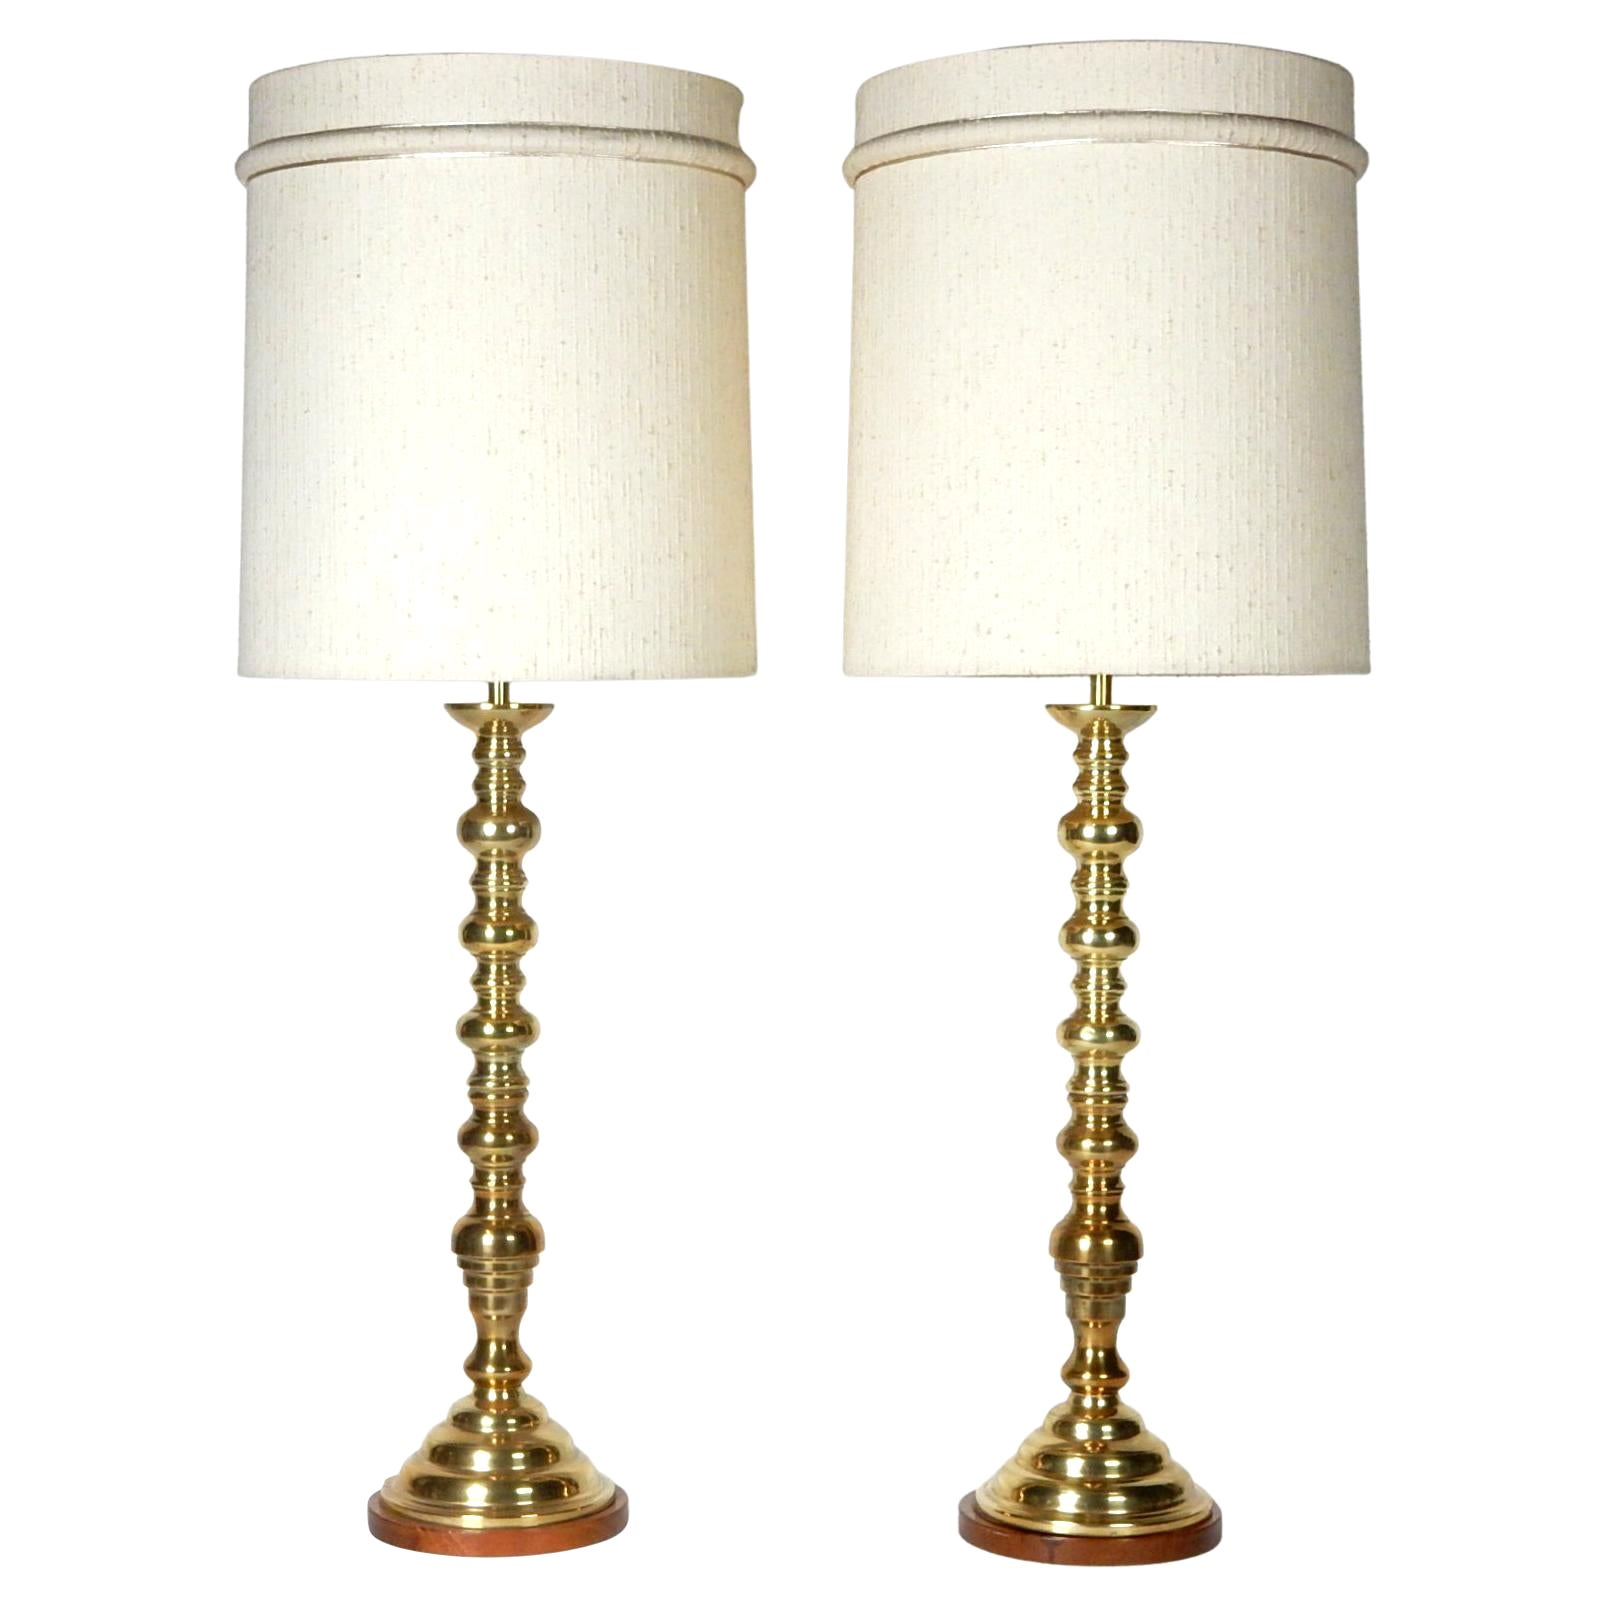 Art Deco Era Tall Brass Candlestick Table Lamps For Sale